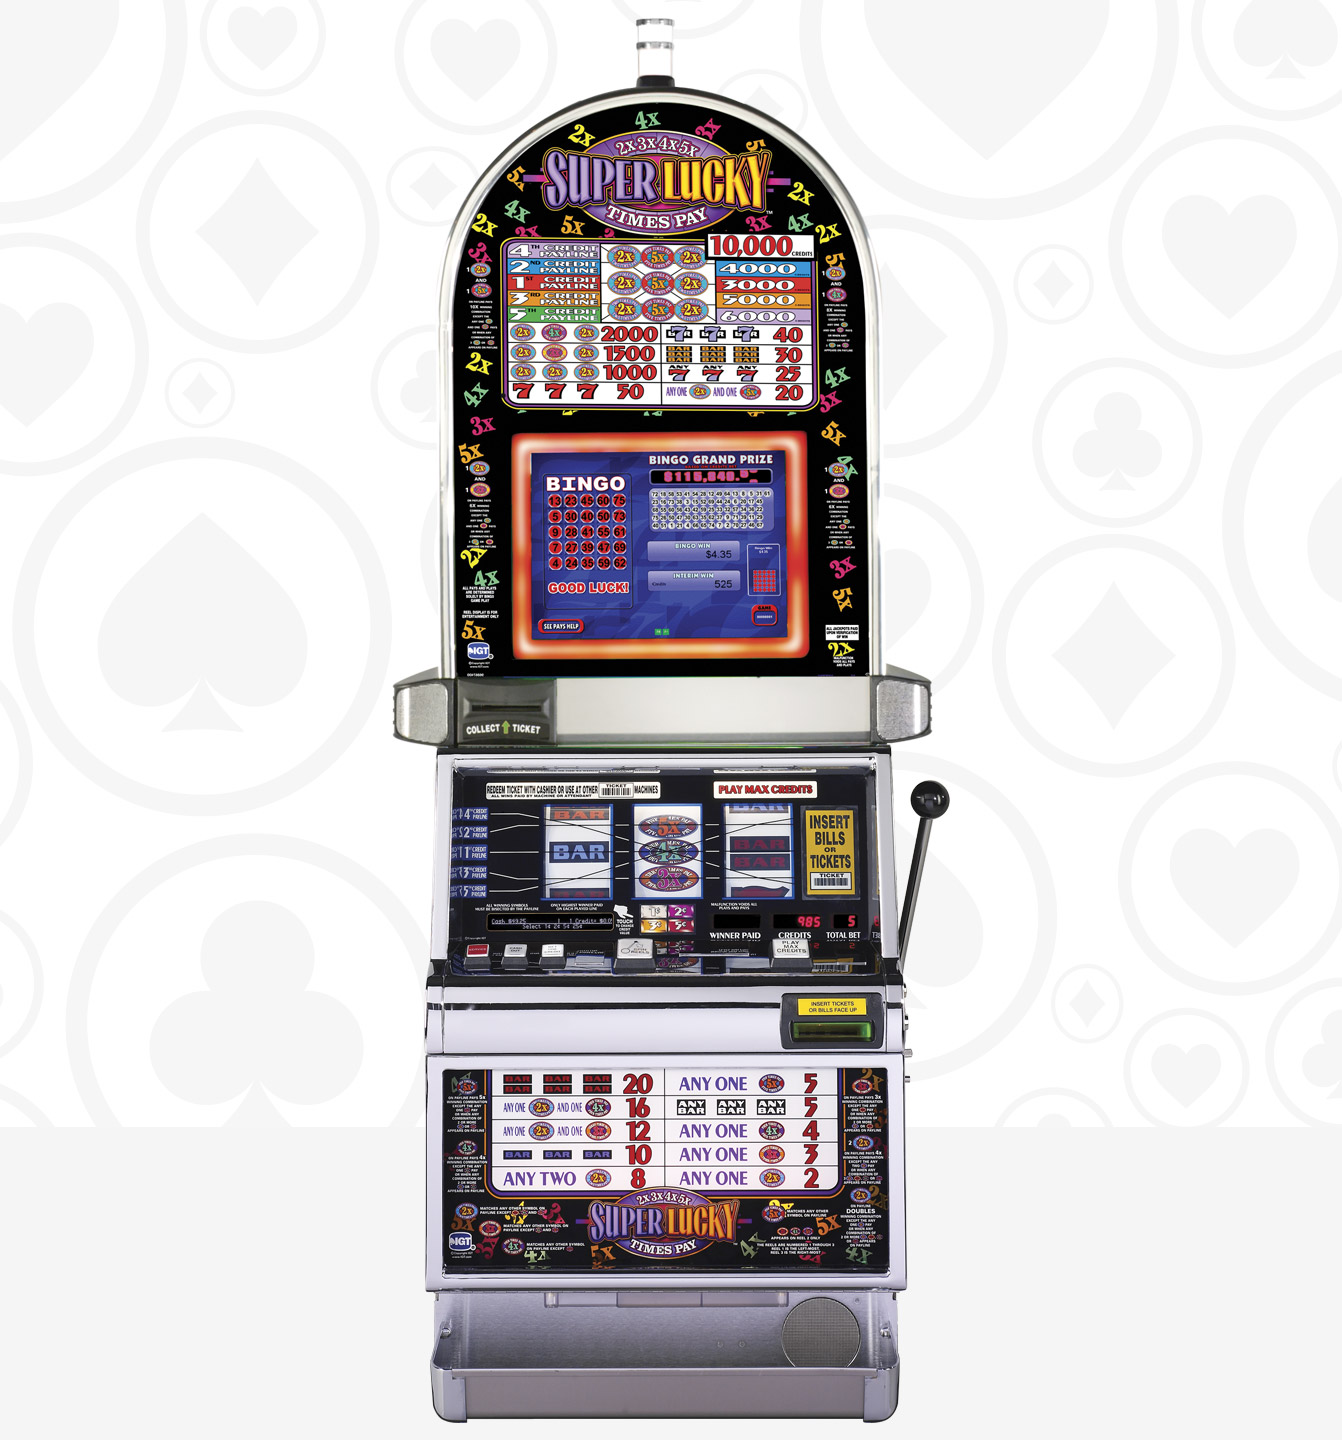 Super lucky casino slots favorites real money